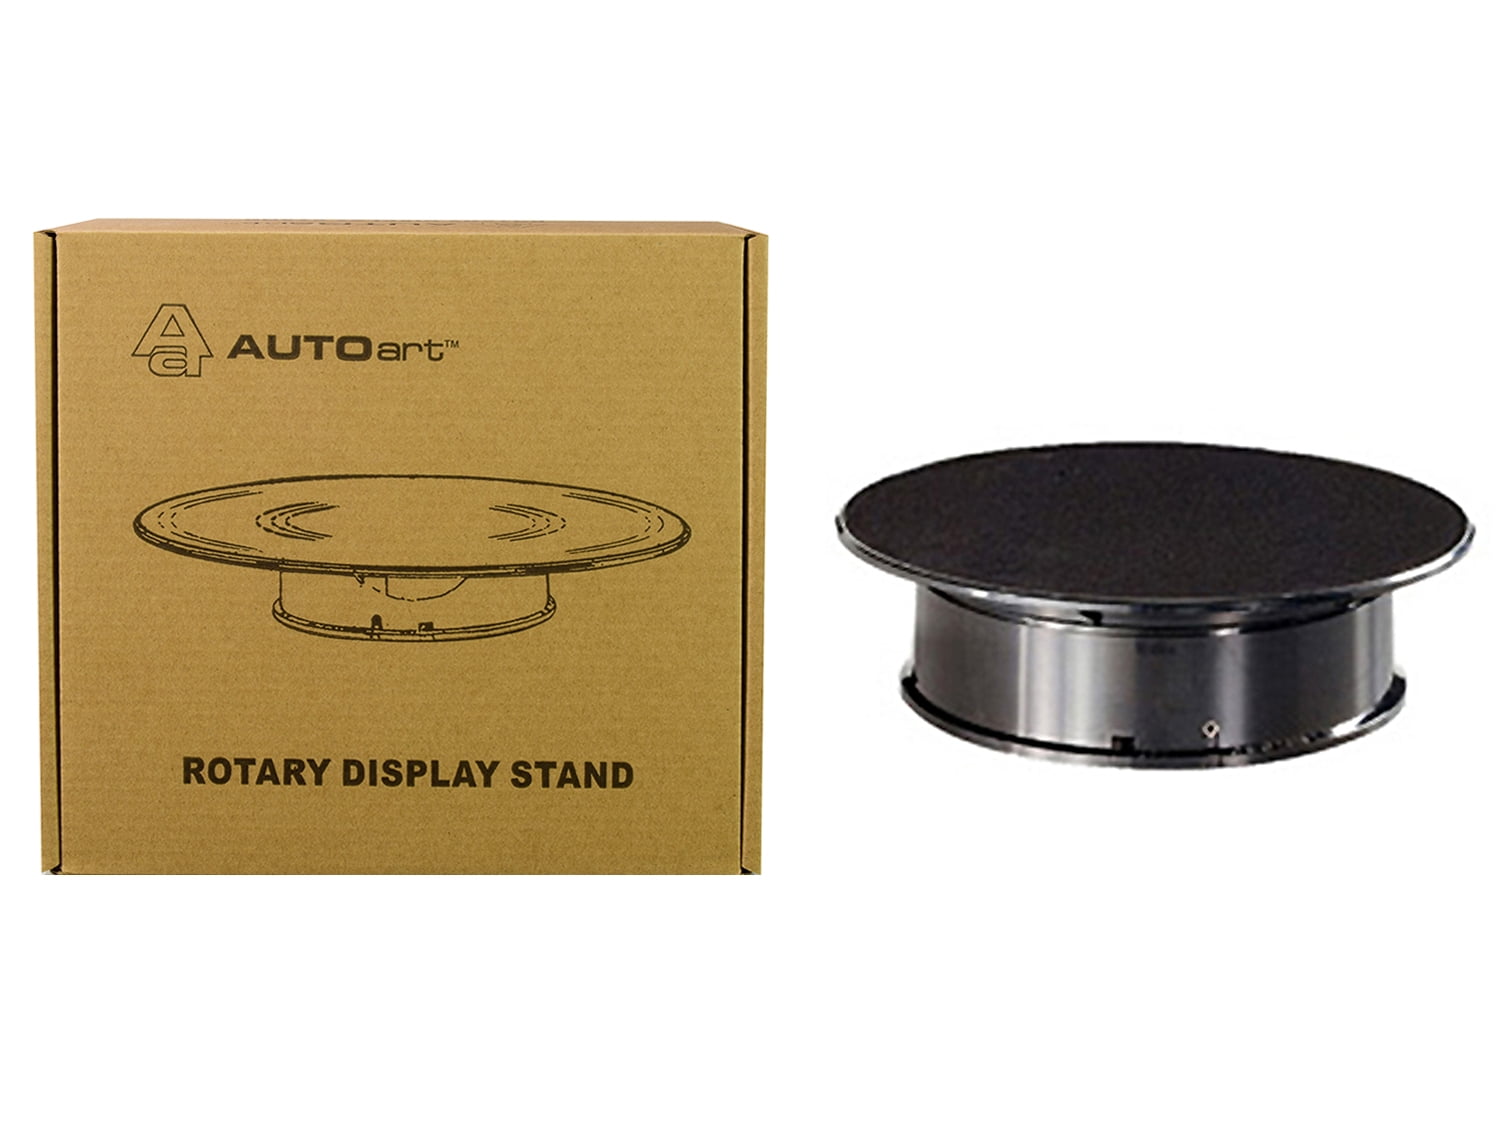 98017 8 In. Rotary Display Turntable Stand With Small Top For 1 By 16 4, 1 By 43, 1 By 32, 1 By 24 Scale Models, Black